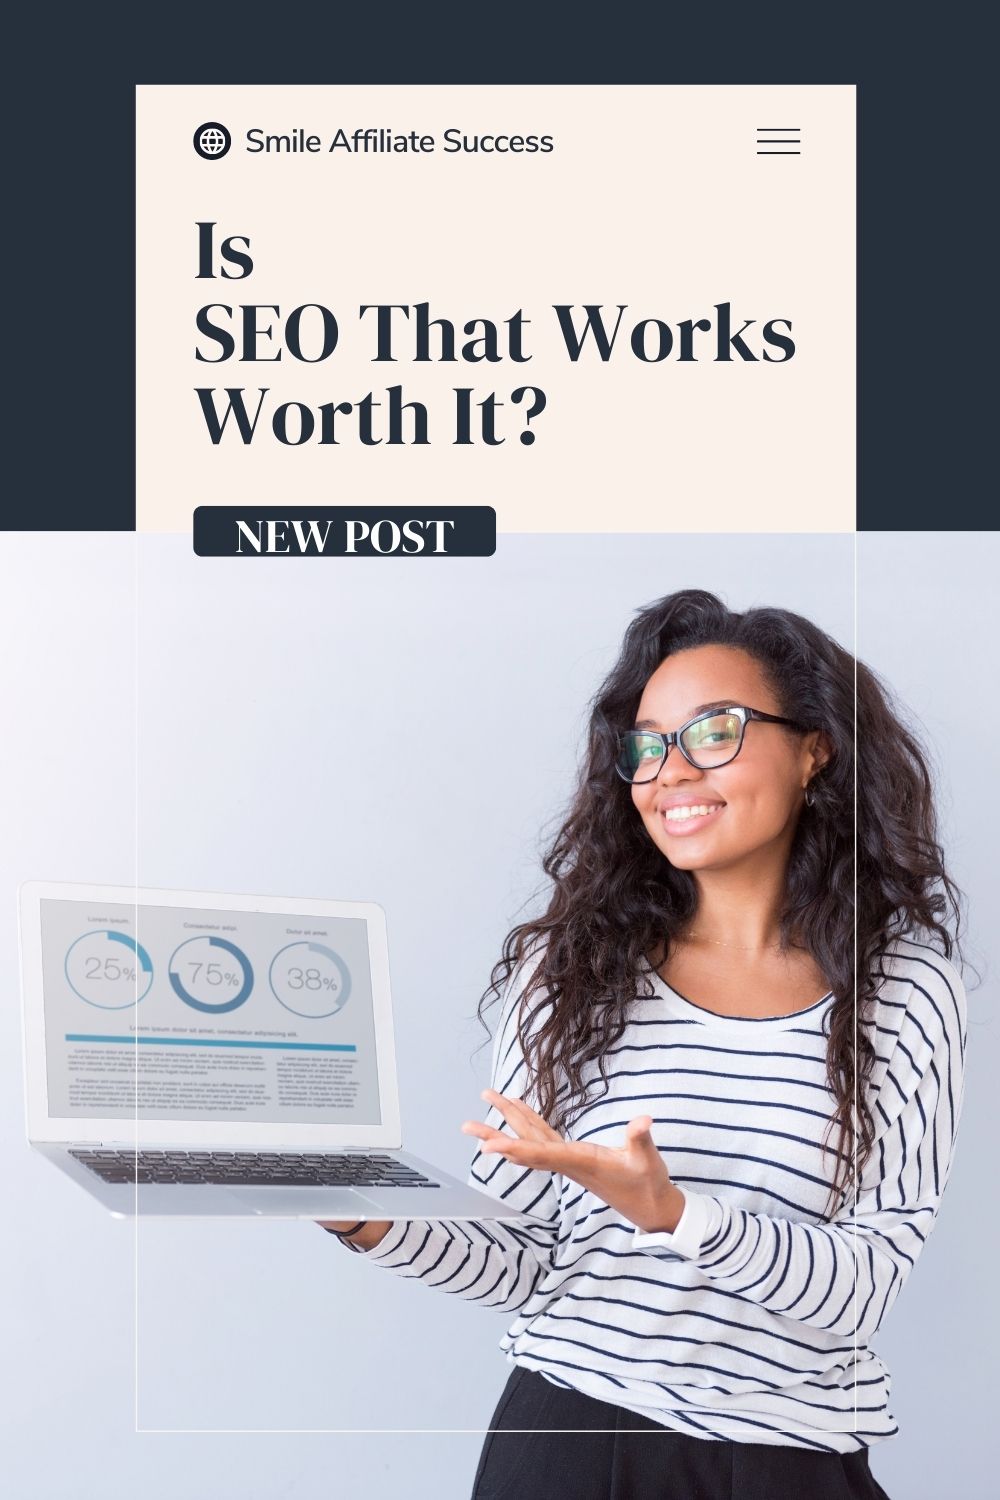 Is SEO That Works Worth It?